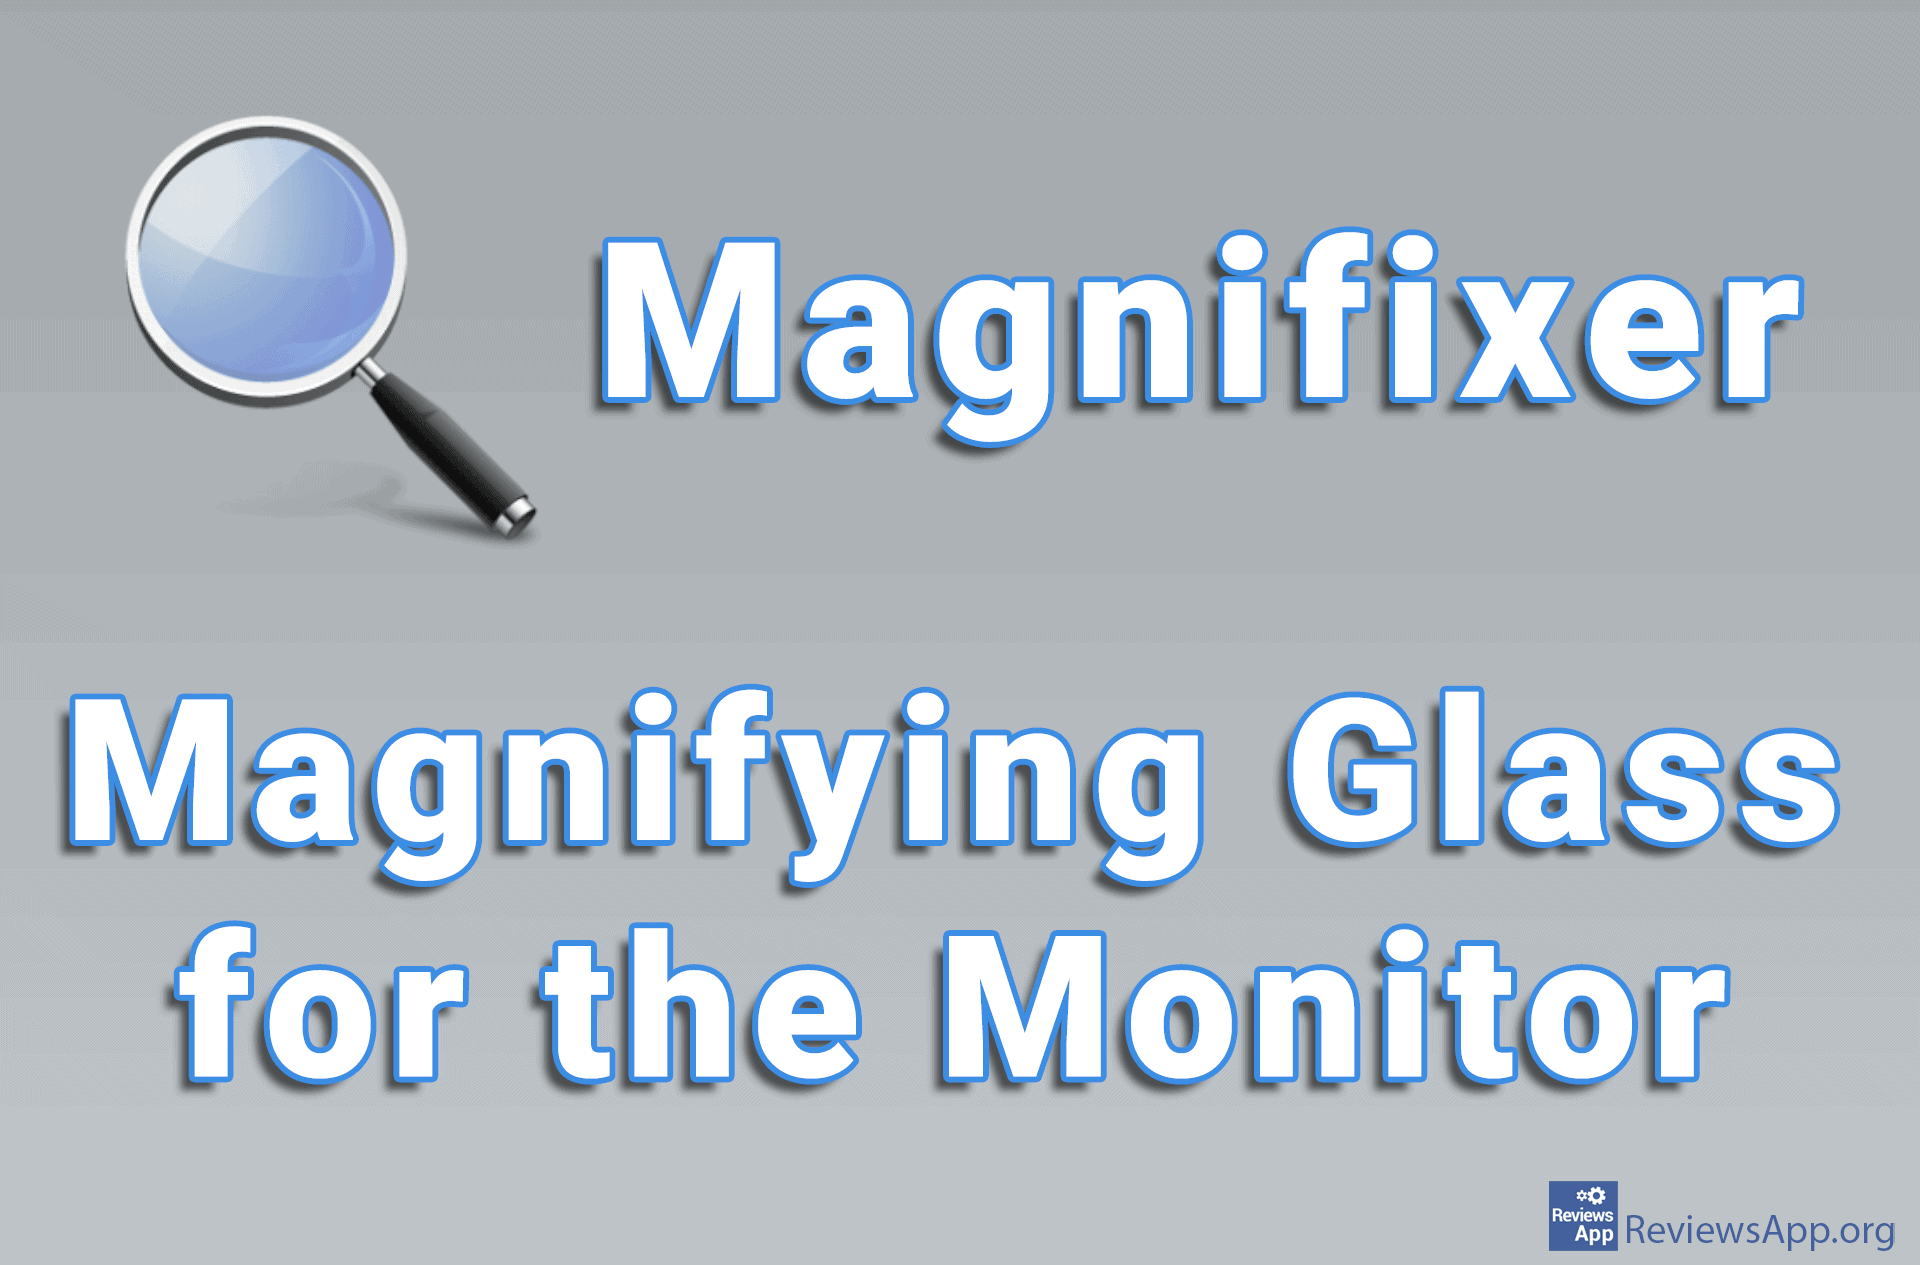 Magnifixer – Magnifying Glass for the Monitor